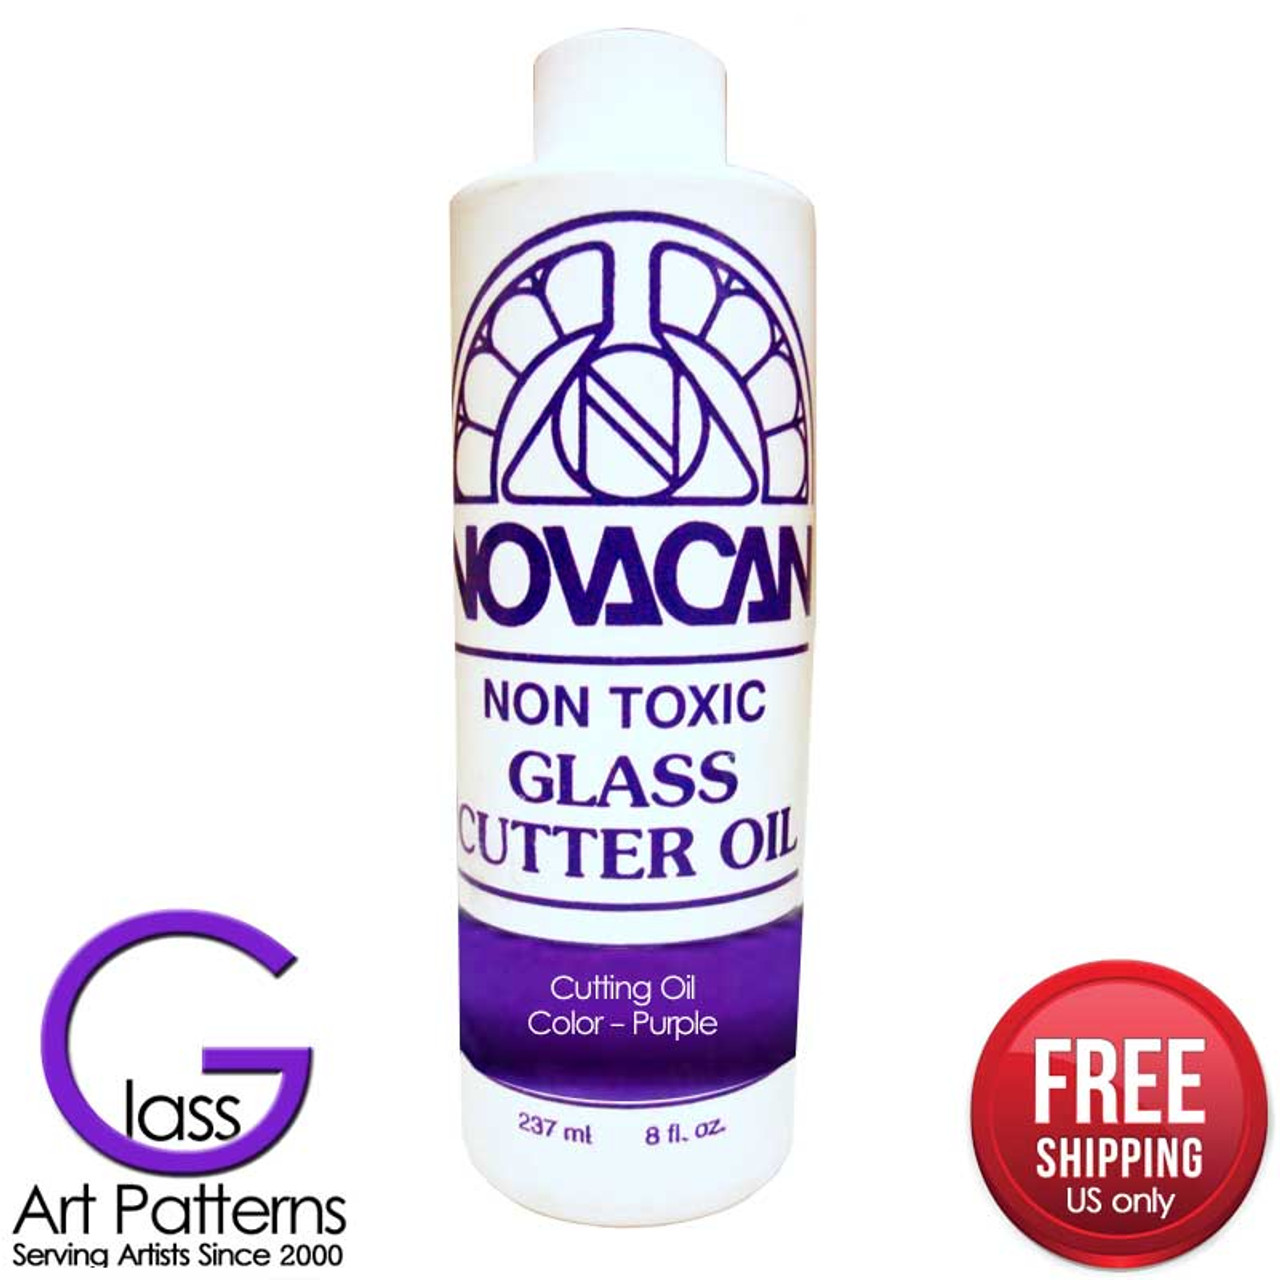 Novacan Cutting Oil Free Us Shipping